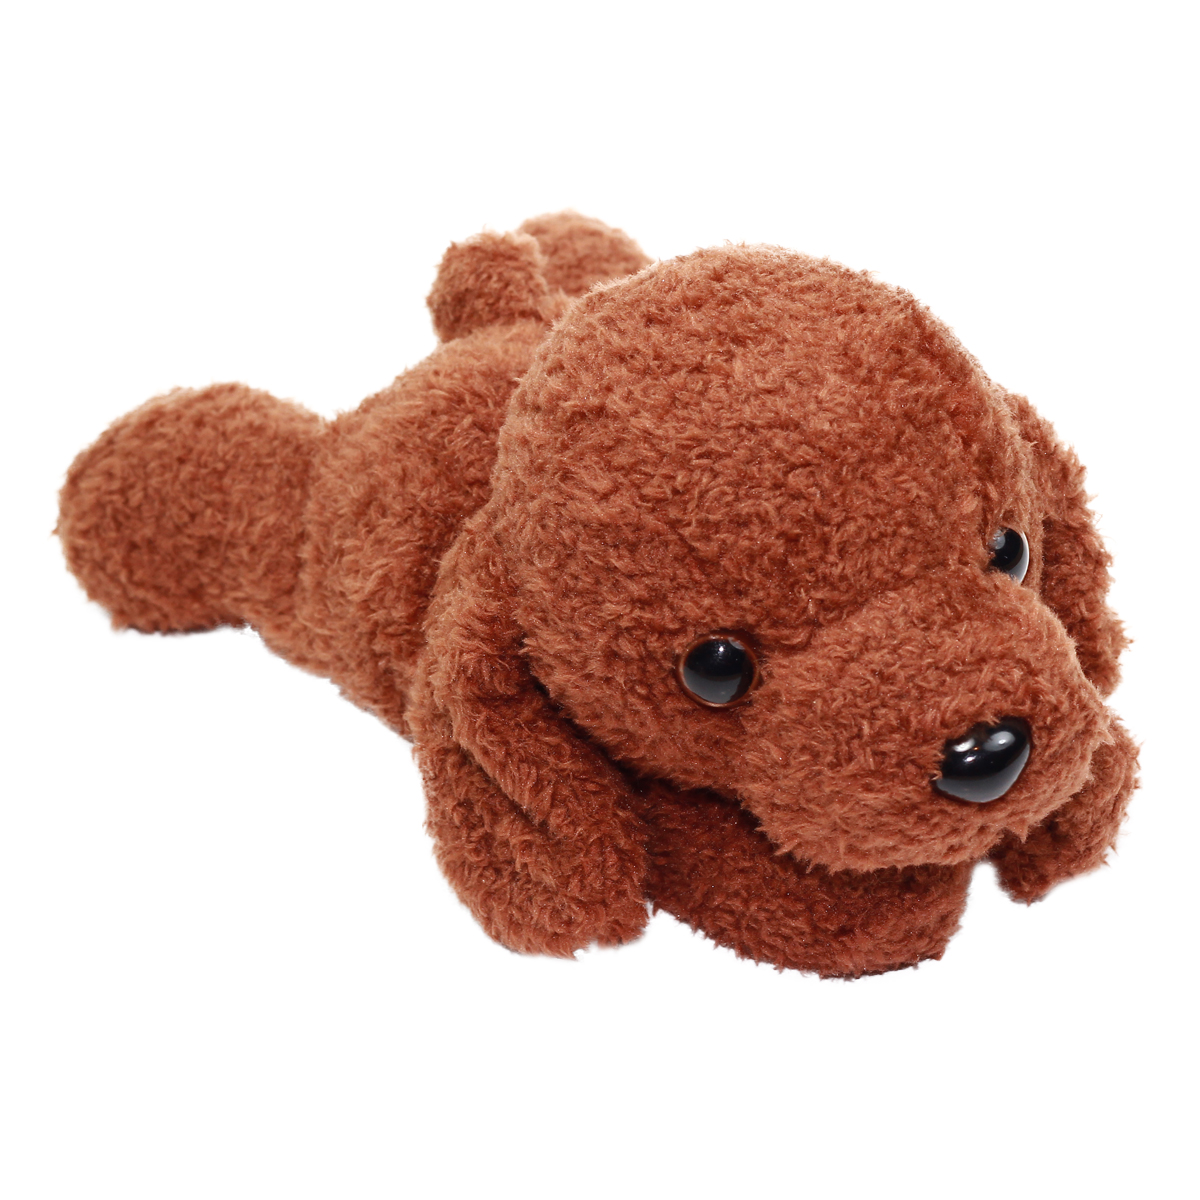 Kawaii Friends Dog Collection Brown Poodle Plush 9 Inches